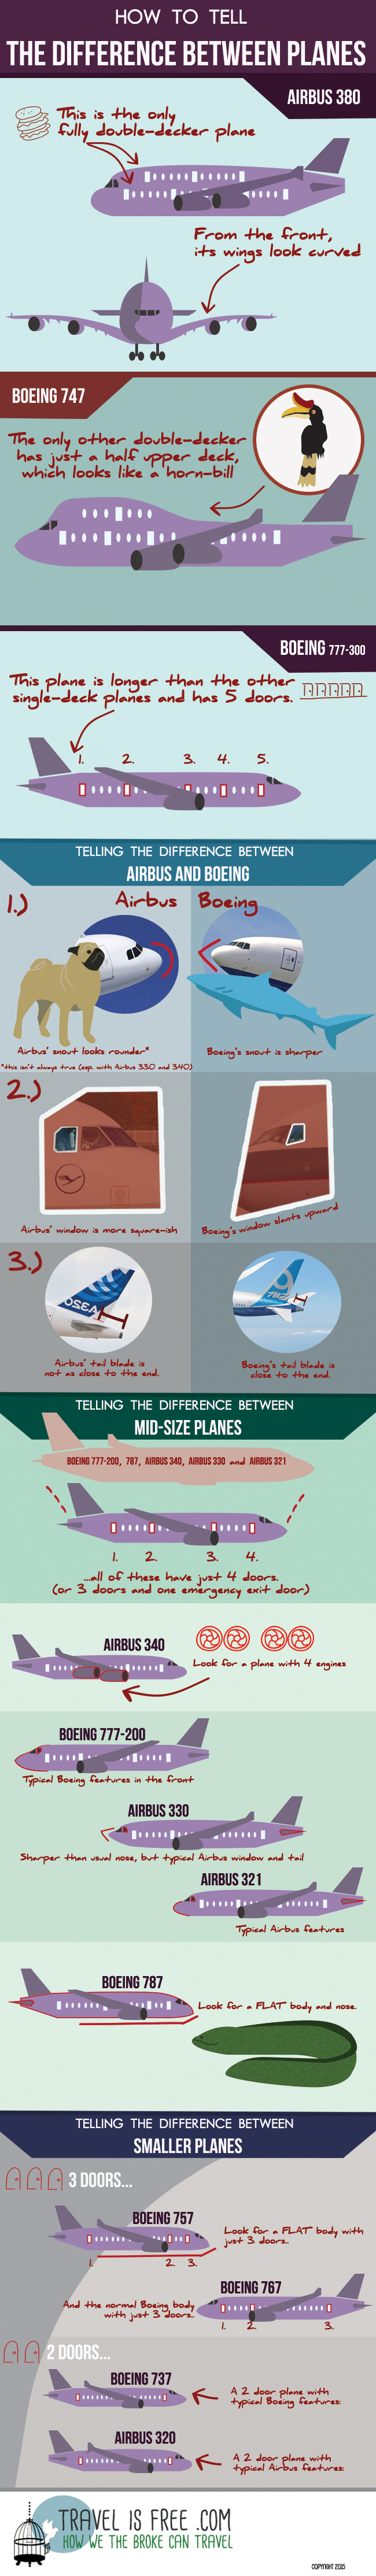 Difference Between Airplanes infographic